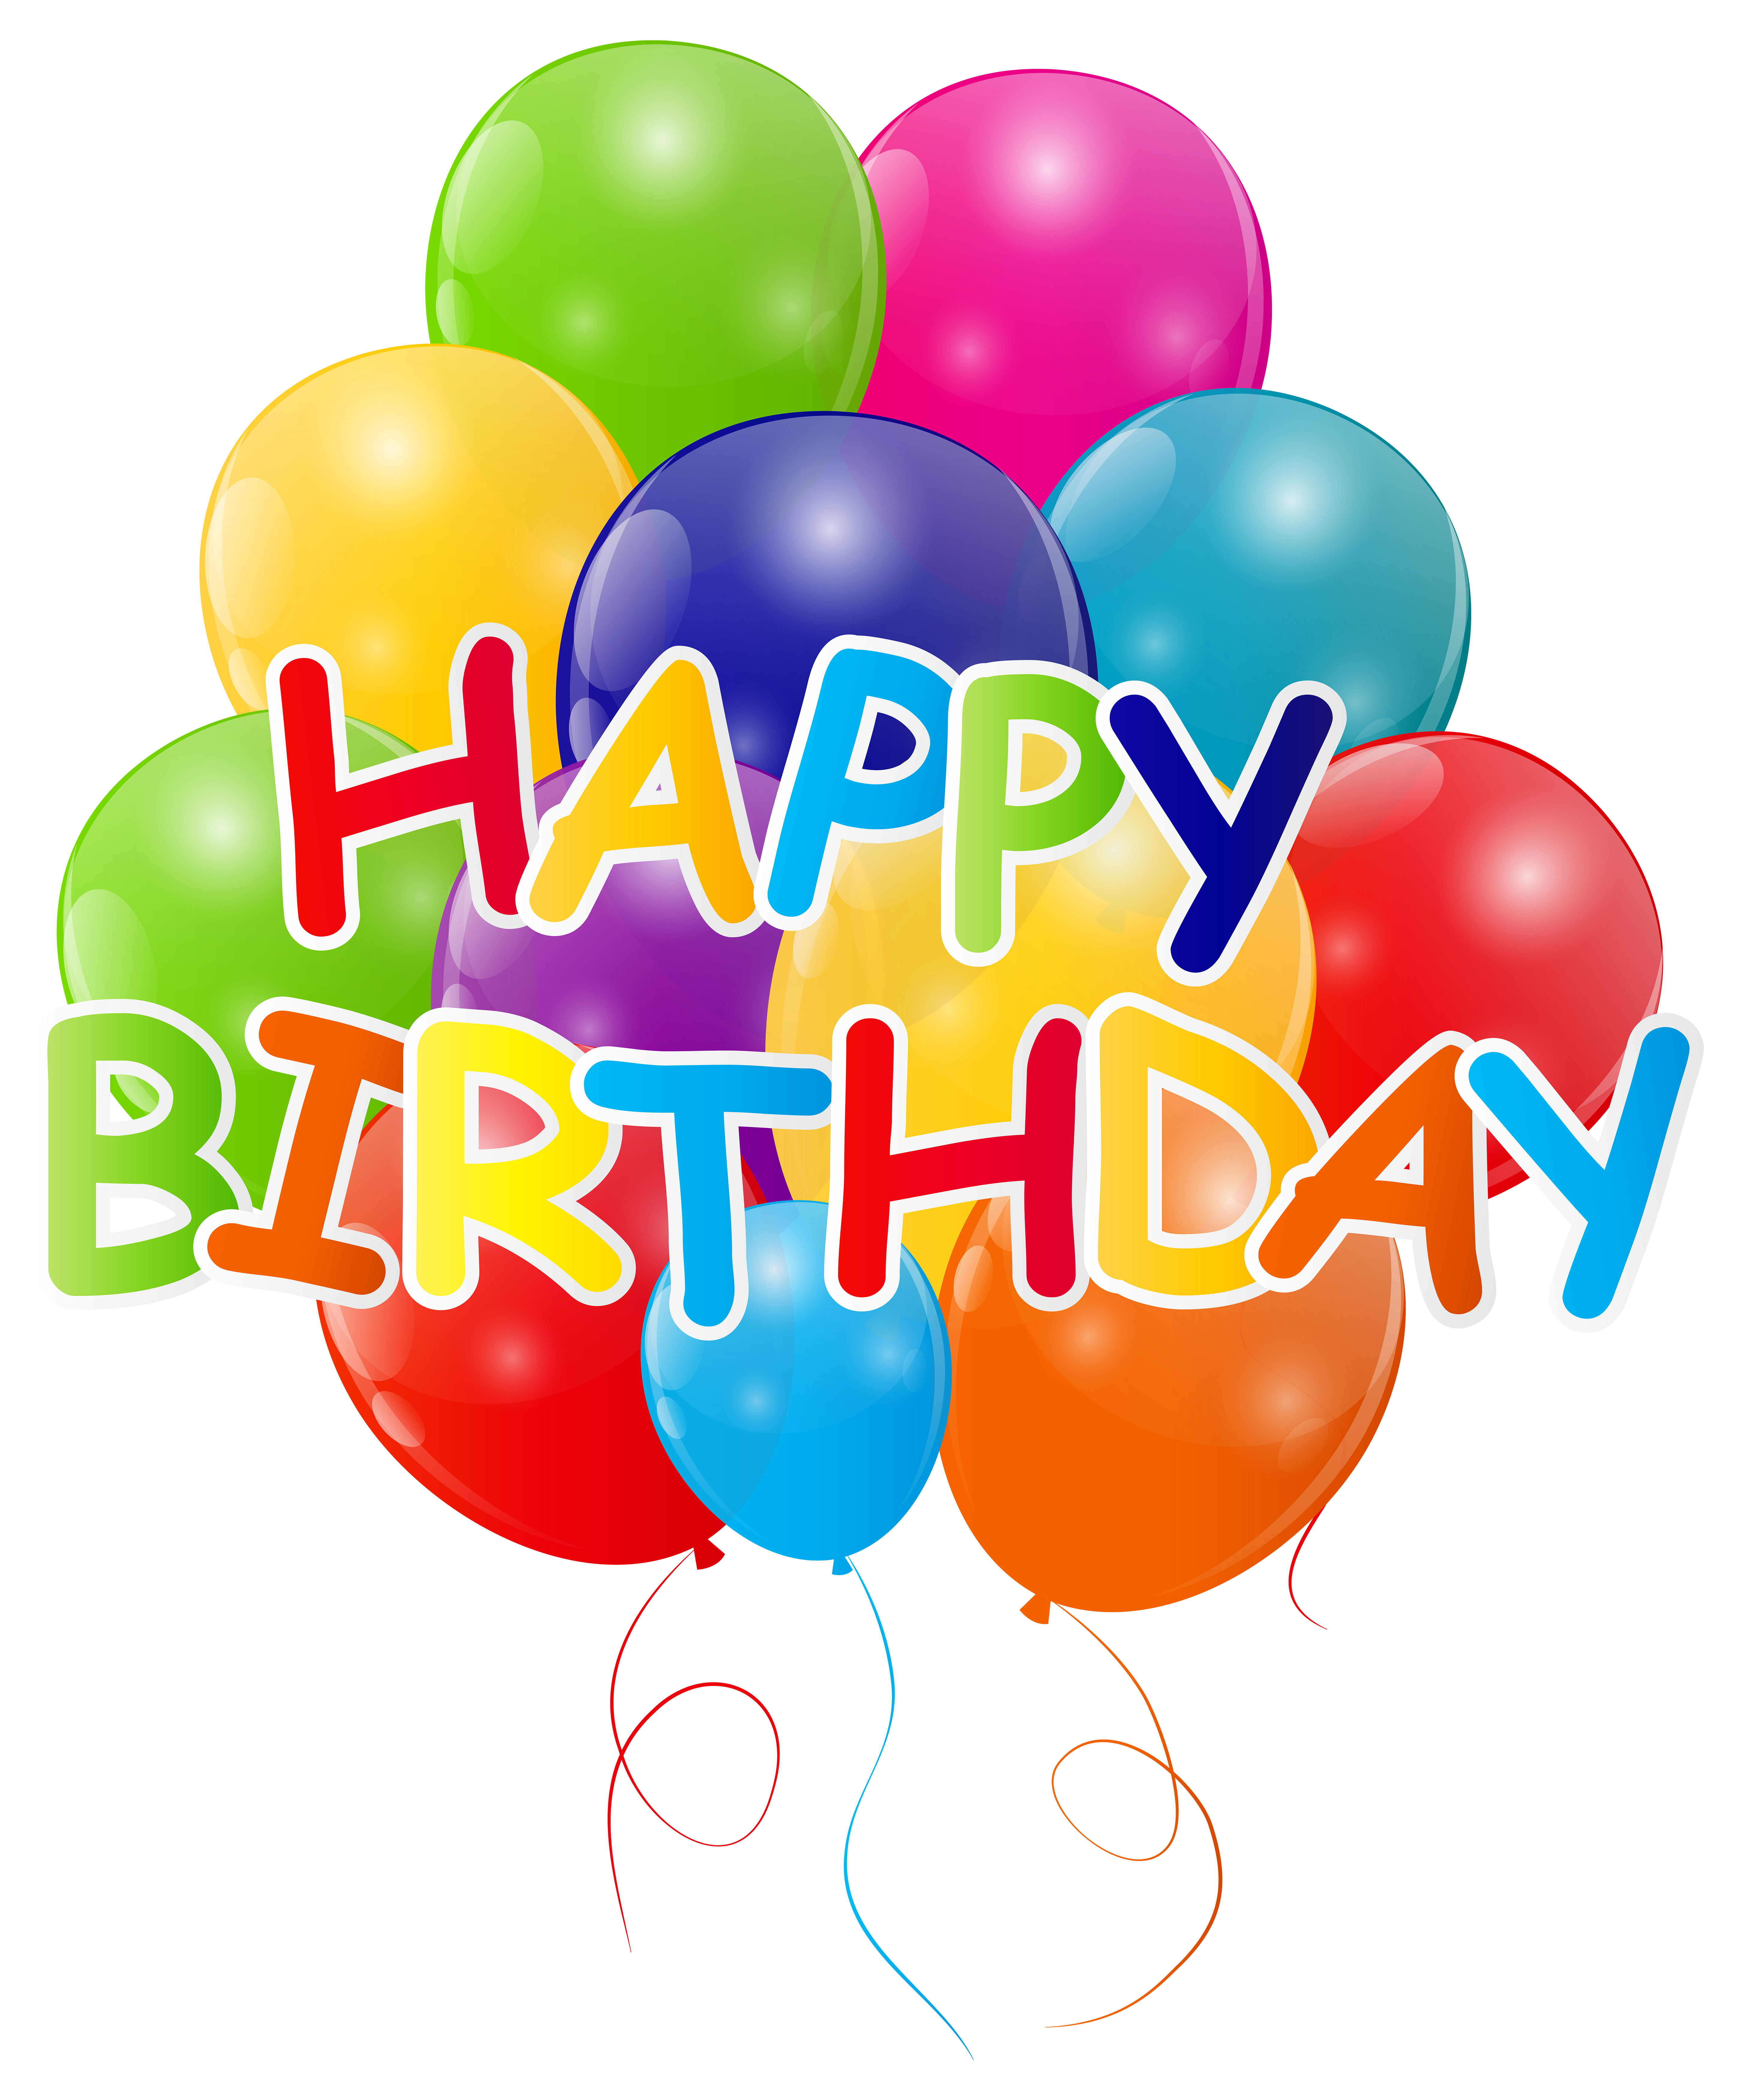 Paintball clipart happy birthday. Bunch of balloons with